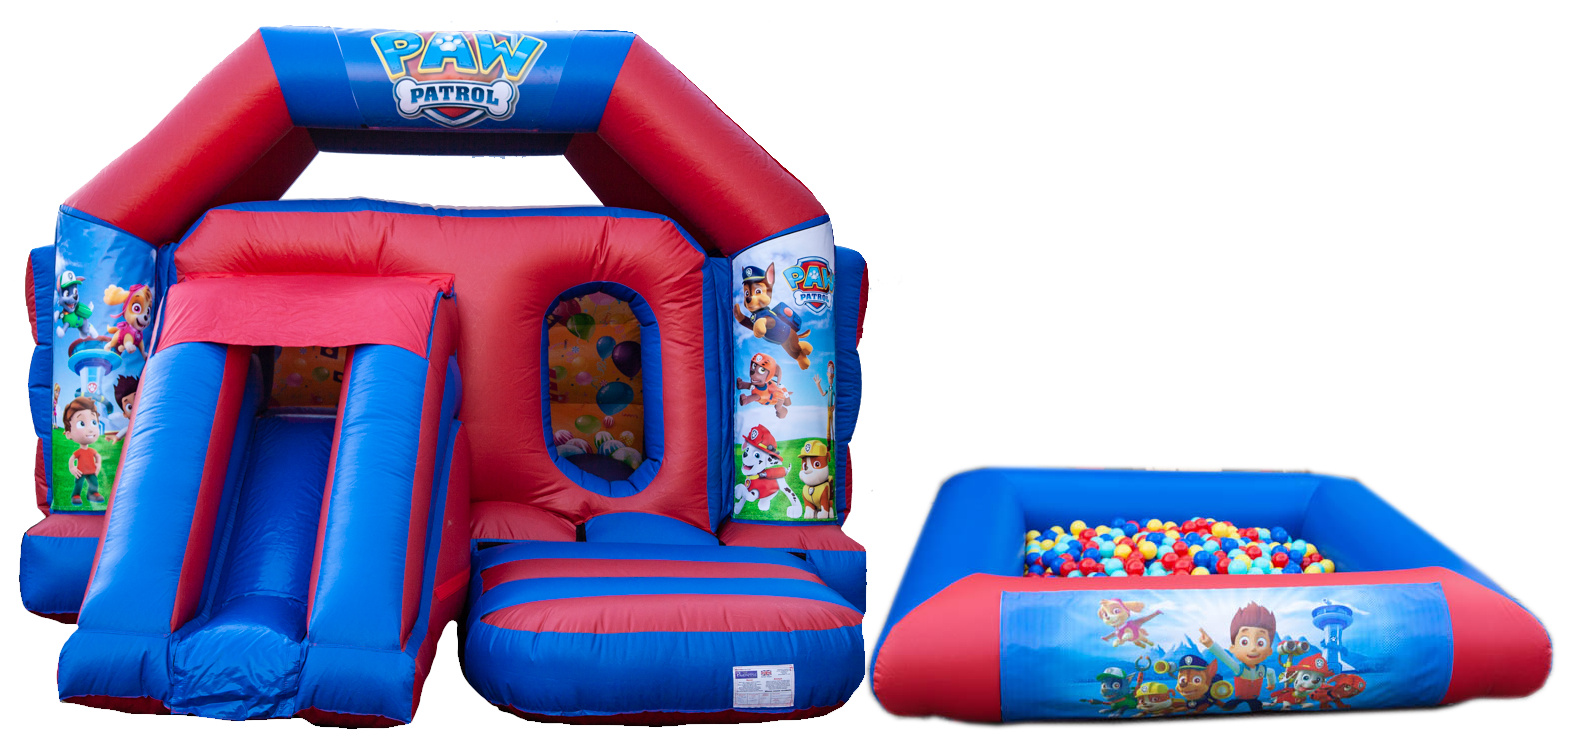 Red and Blue Ball pool and bouncy castle package  for hire in Meppershall